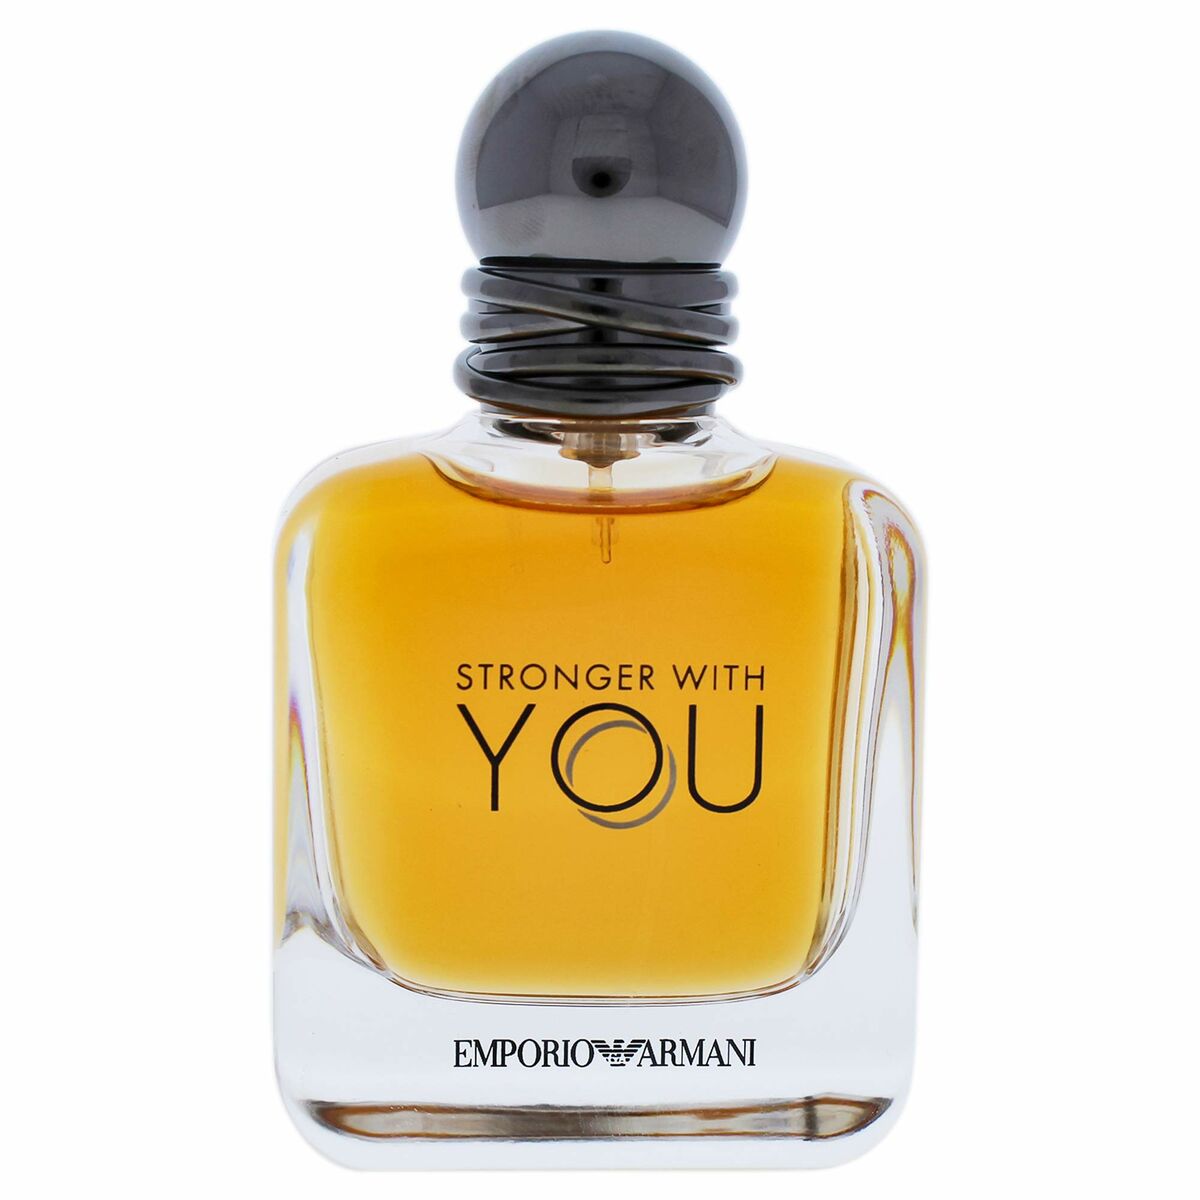 Kaufe Armani Stronger With You EDT Stronger With You 50 ml - Herren bei AWK Flagship um € 86.00